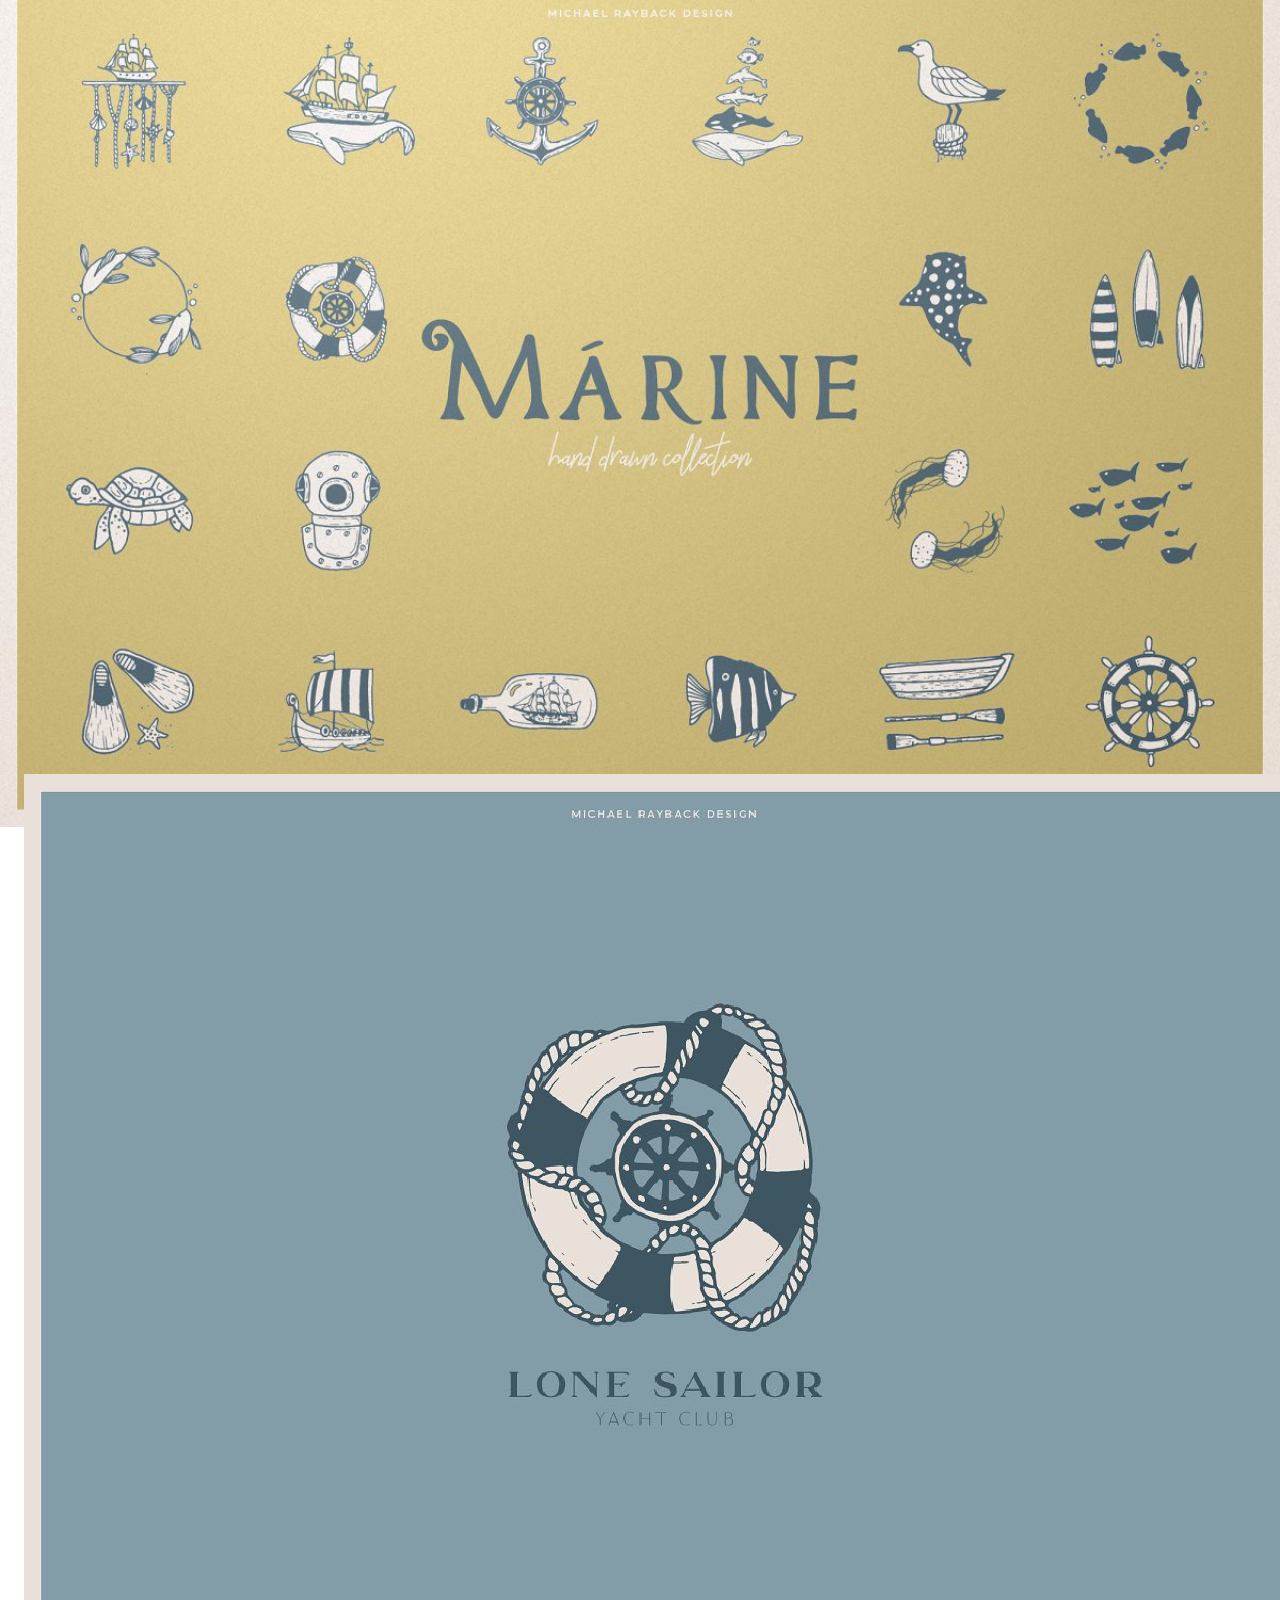 200 hand drawn elements marine pinterest image preview.